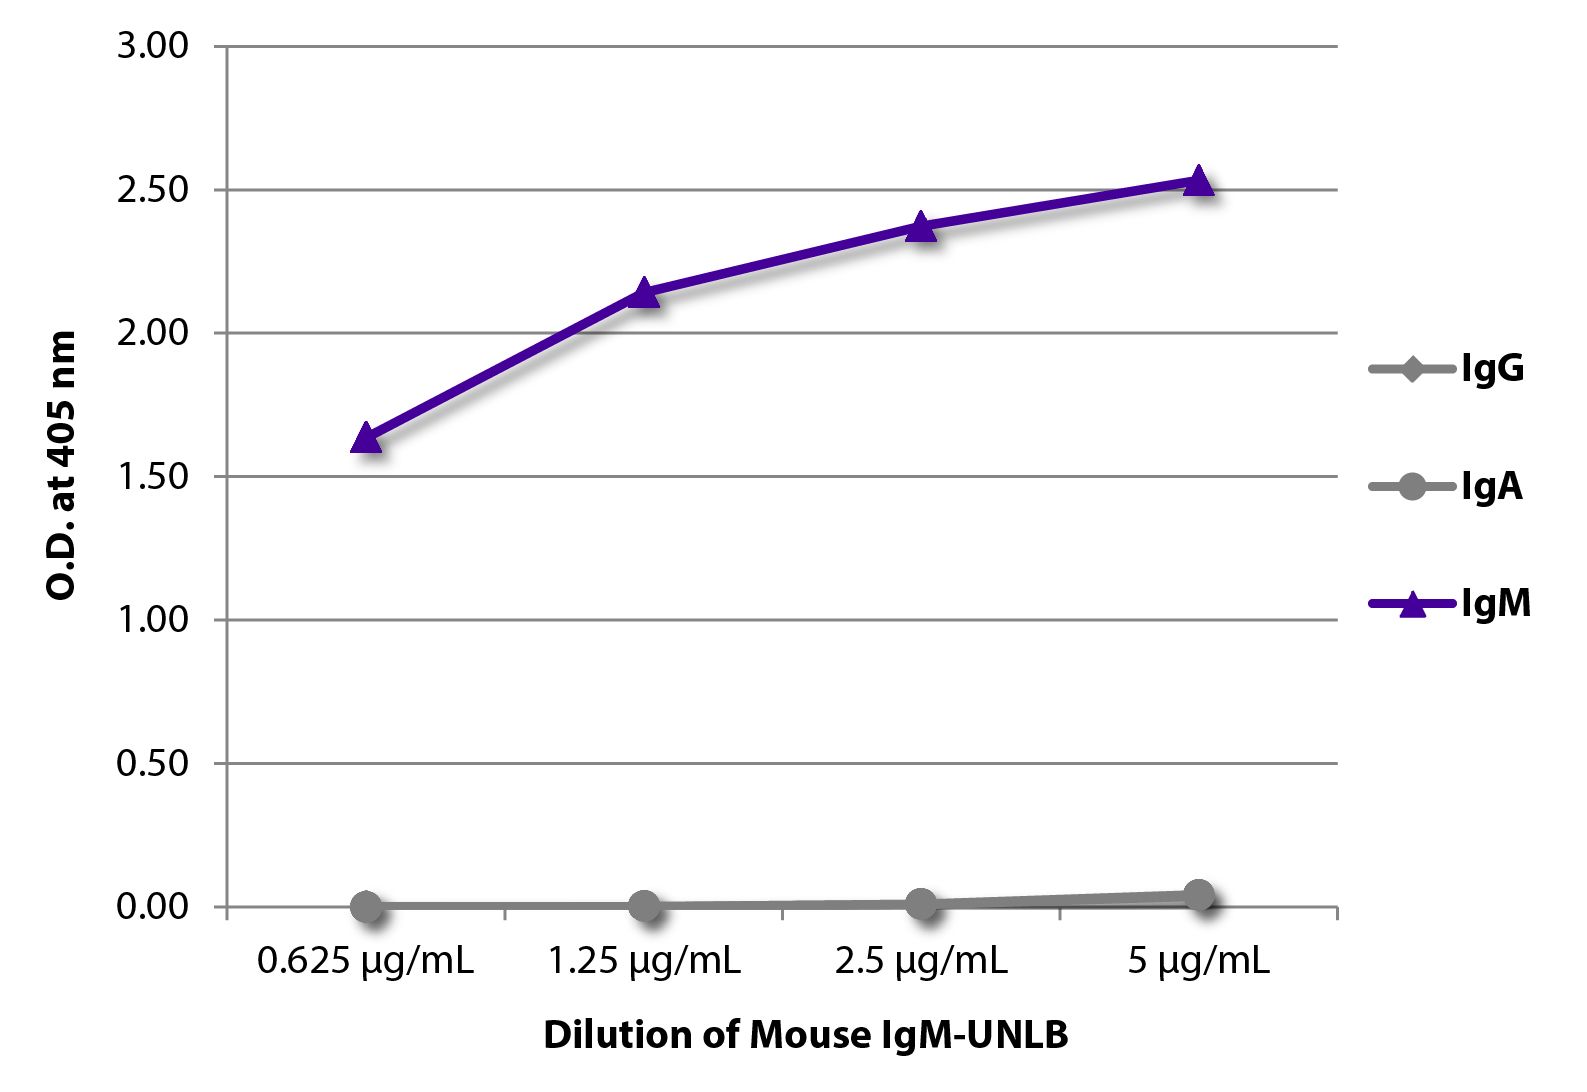 ELISA plate was coated with serially diluted Mouse IgM-UNLB (SB Cat. No. 0101-01).  Immunoglobulin was detected with Goat Anti-Mouse IgG, Human ads-BIOT (SB Cat. No. 1030-08), Goat Anti-Mouse IgA-BIOT (SB Cat. No. 1040-08), and Goat Anti-Mouse IgM, Human ads-BIOT (SB Cat. No. 1020-08) followed by Streptavidin-HRP (SB Cat No. 7100-05) and quantified.